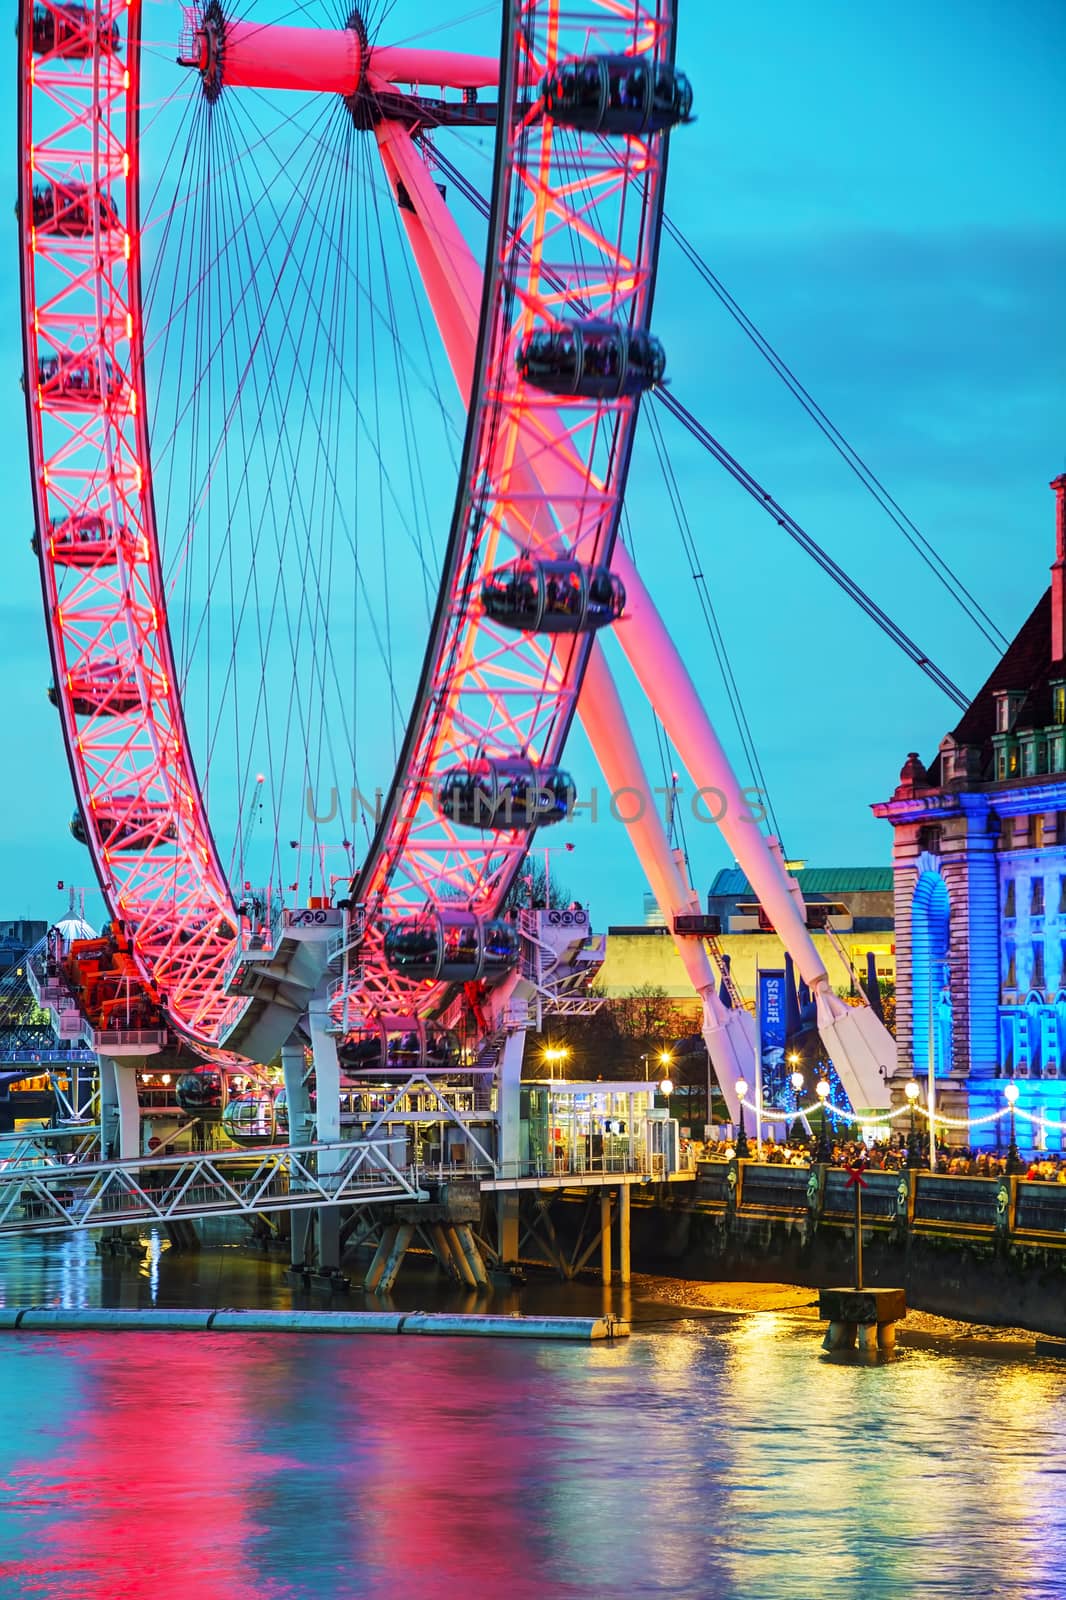 LONDON - APRIL 5: The London Eye Ferris wheel in the evening on April 5, 2015 in London, UK. The entire structure is 135 metres tall and the wheel has a diameter of 120 metres.